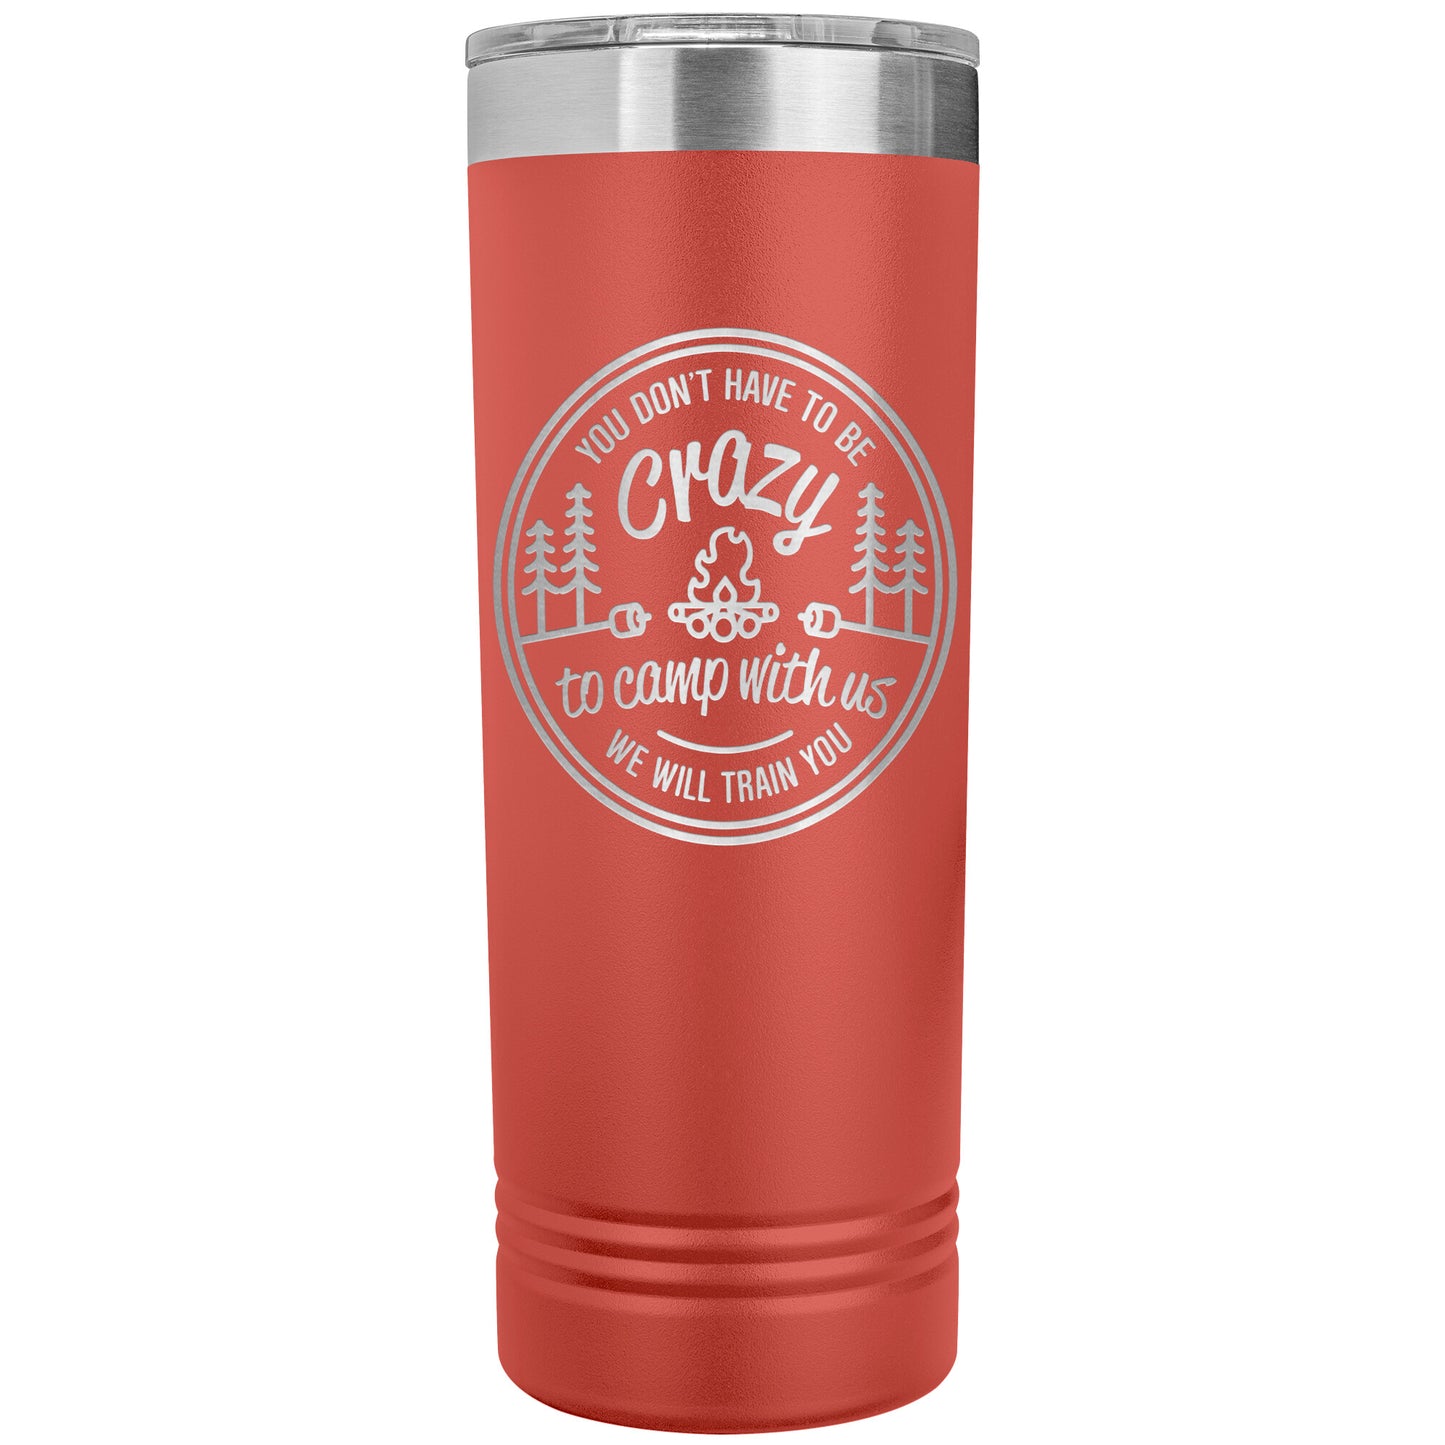 Funny Camping Tumbler Mug - You Don't Have To Be Crazy To Camp With Us